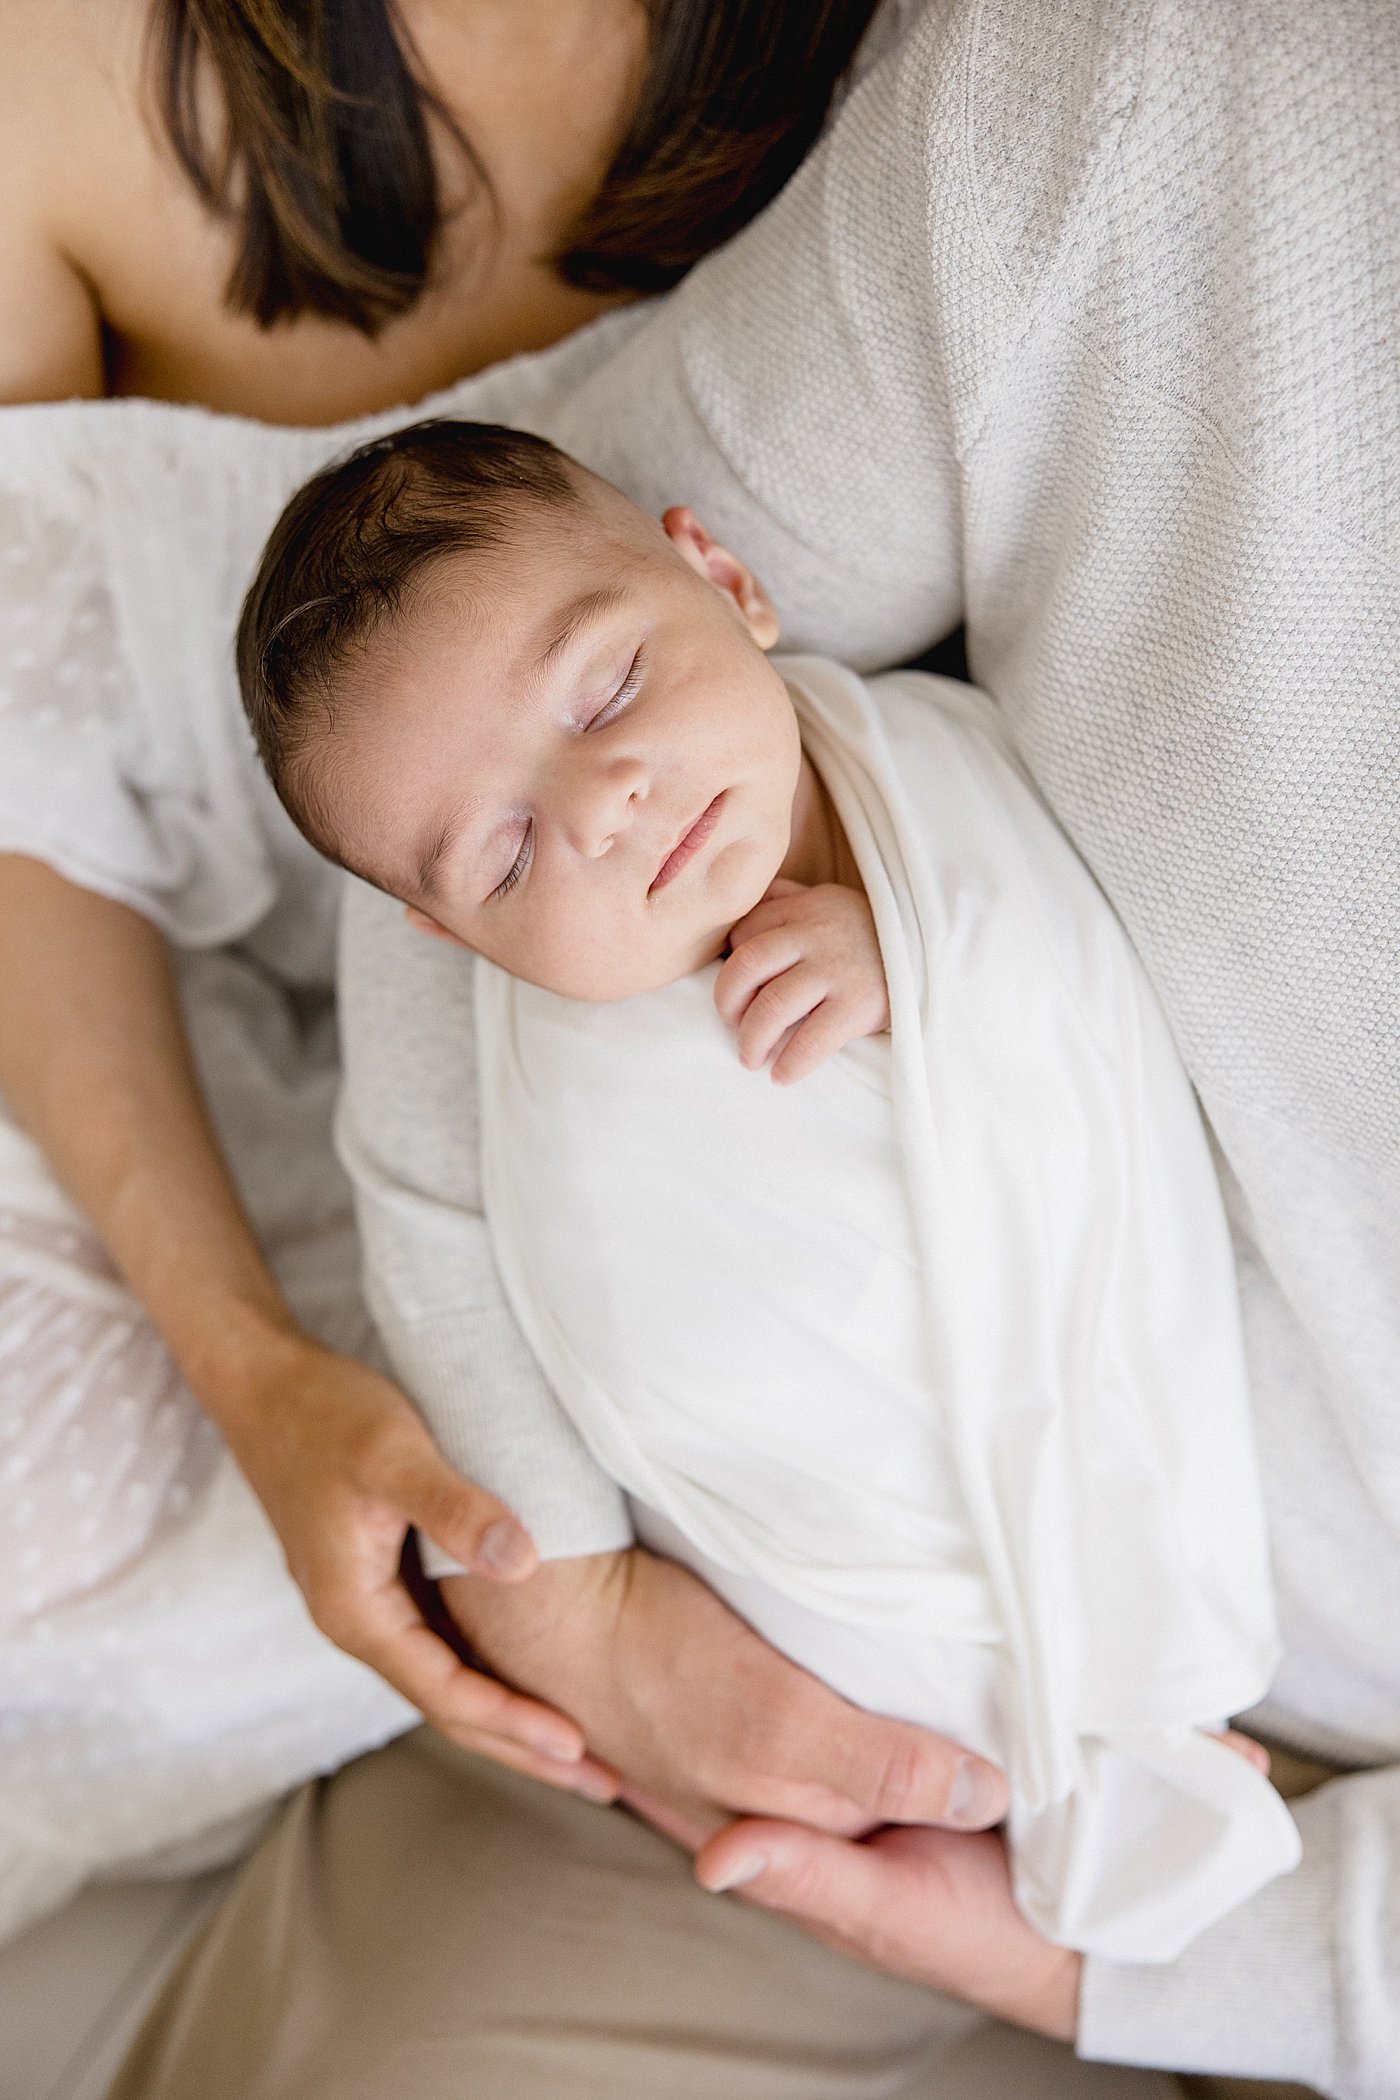 Baby Boy In Swaddle With Newport Beach Photographer | Ambre Williams Photography